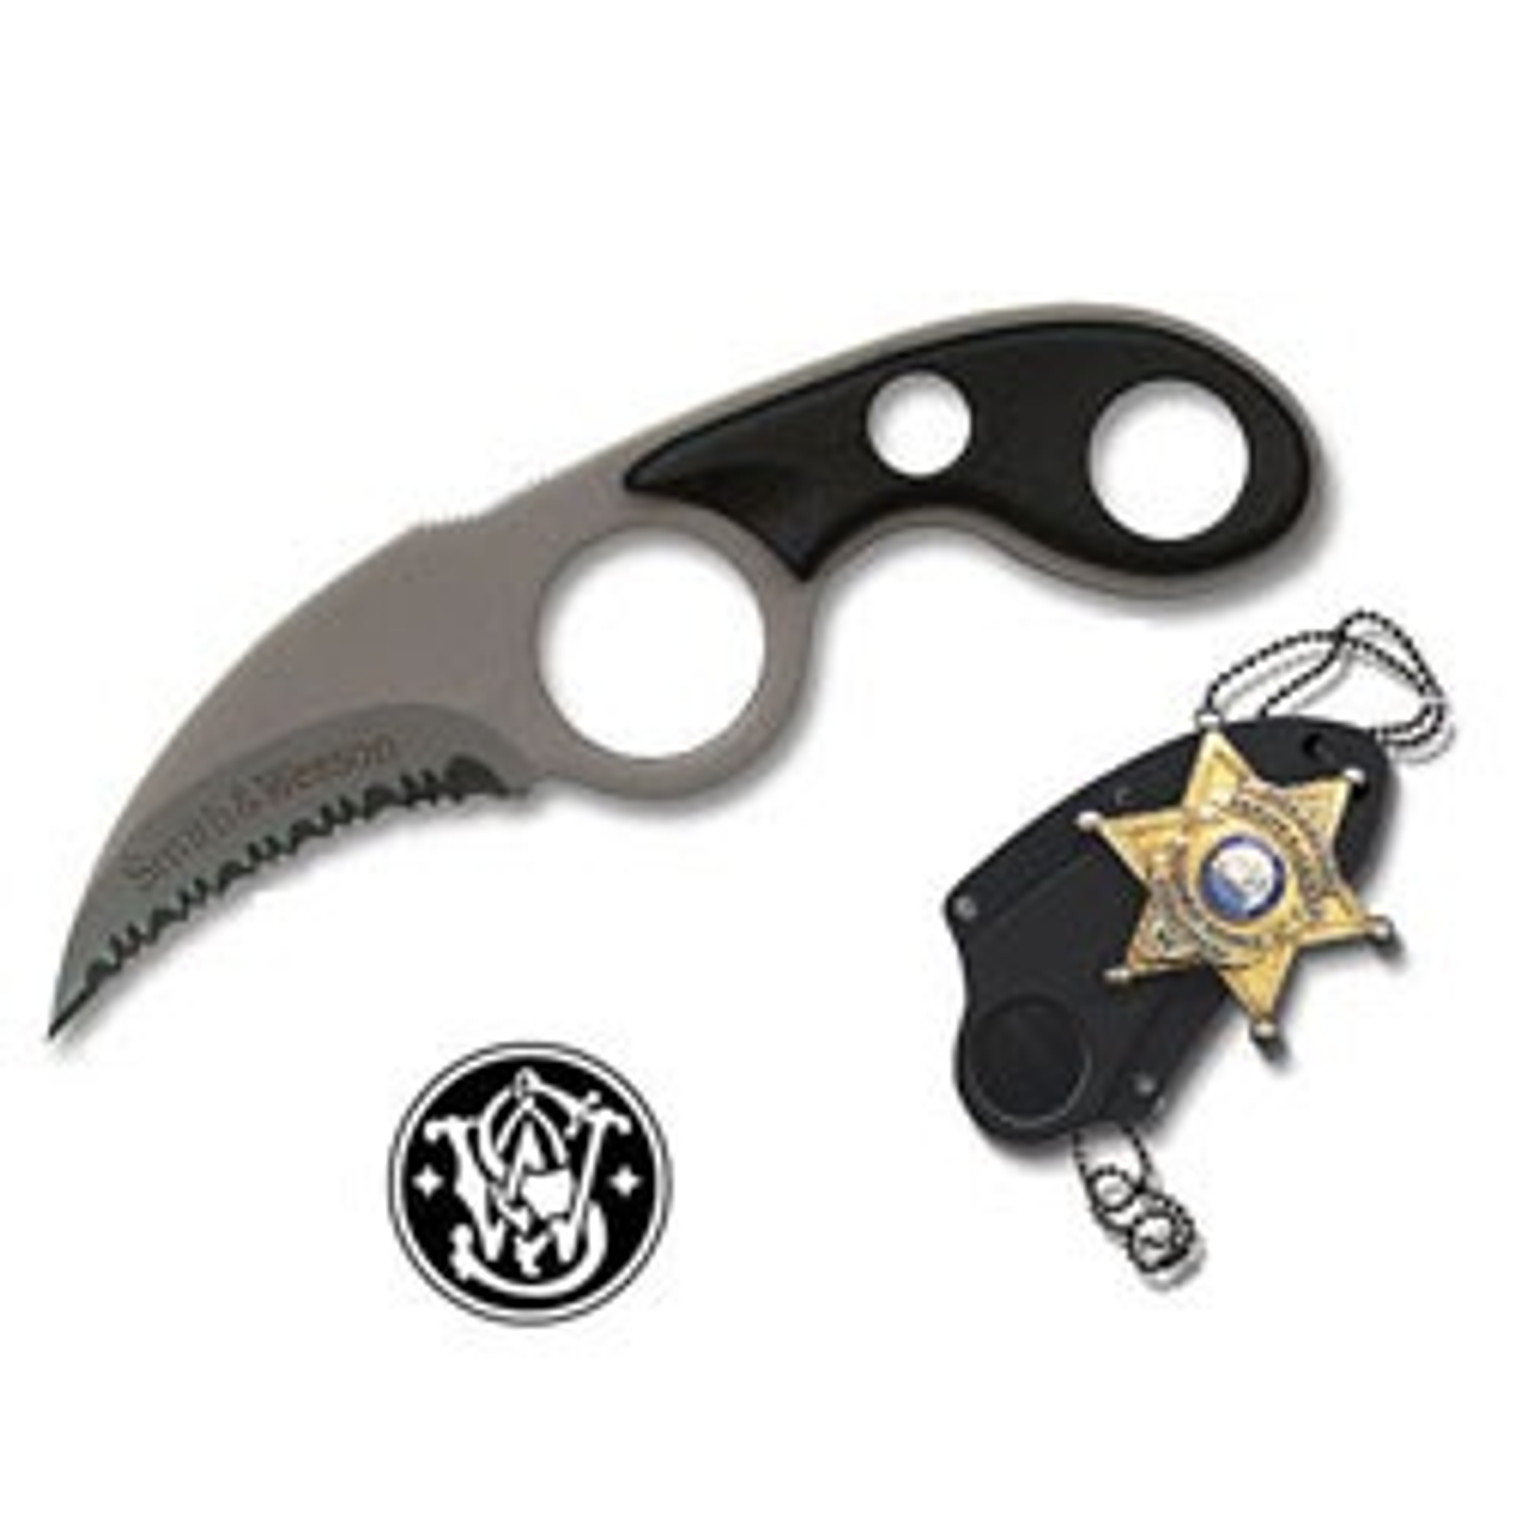 Smith & Wesson Plain Badge Knife - Silver